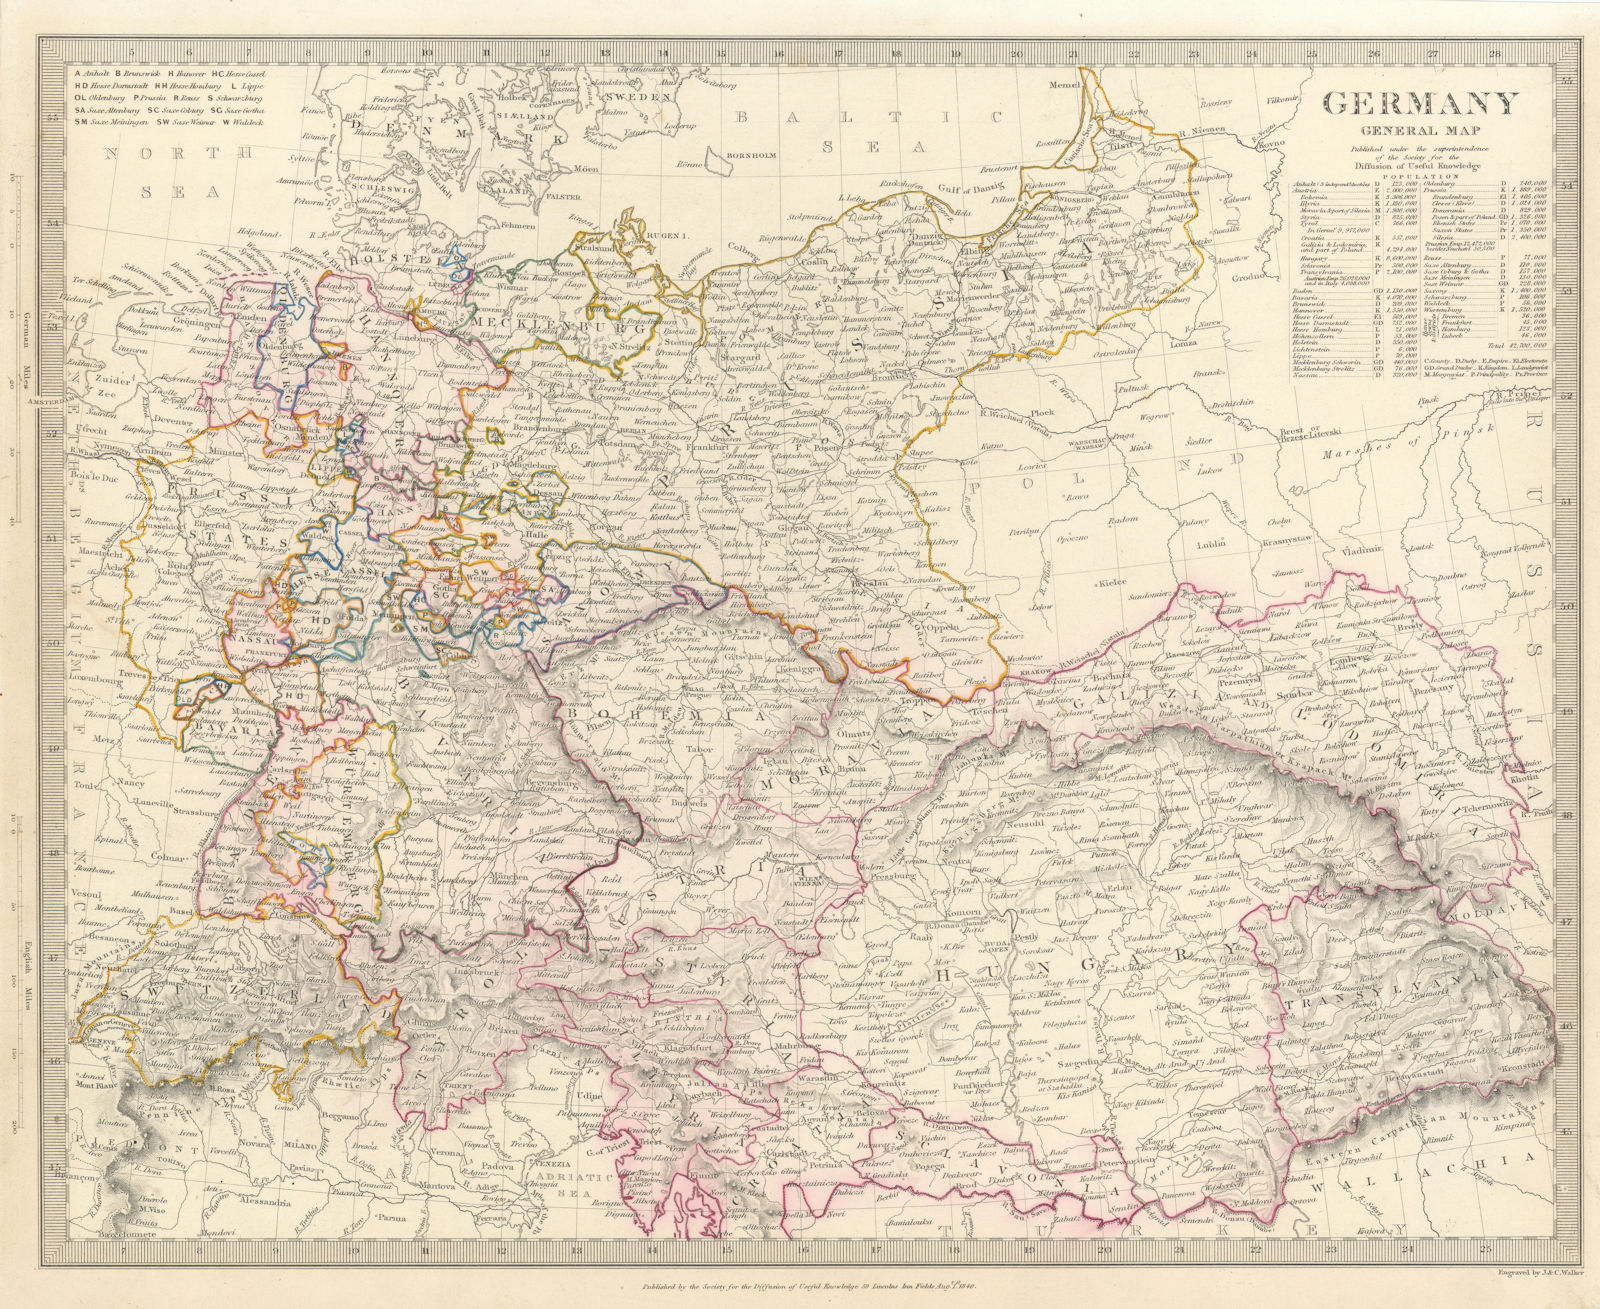 Associate Product GERMANY. General Map. Hungary. Population table. SDUK 1844 old antique